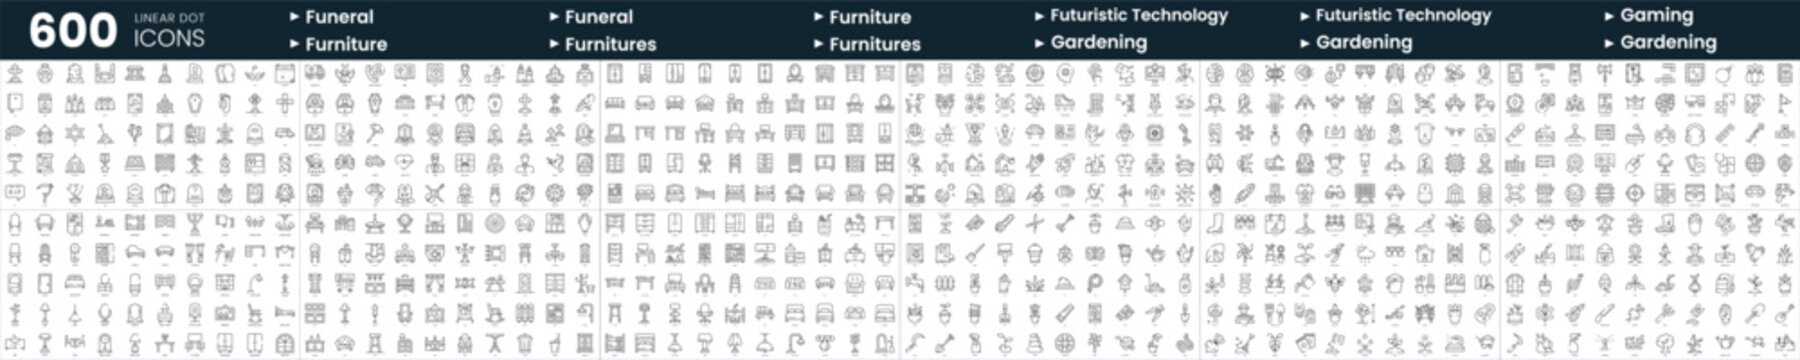 Set of 600 thin line icons. In this bundle include funeral, futuristic technology, gardening and more